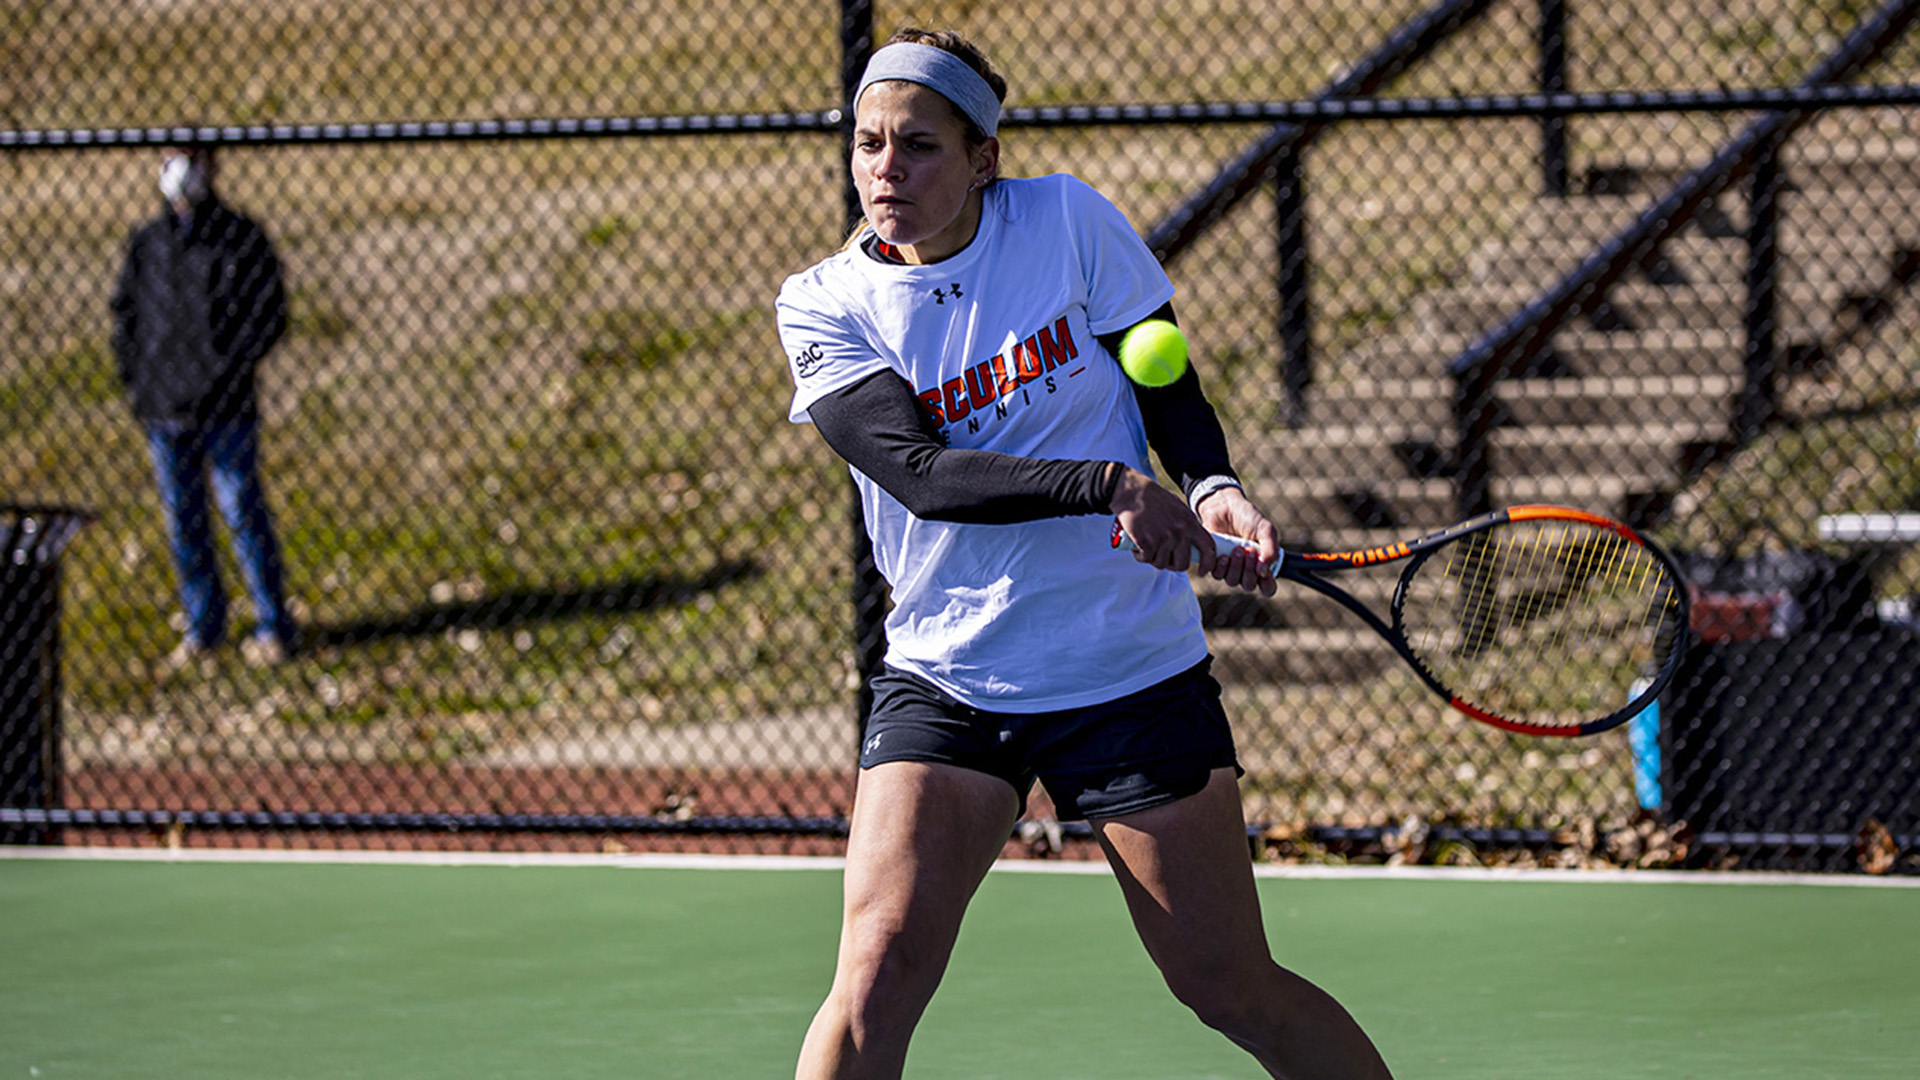 Pioneers split two matches during Georgia road swing